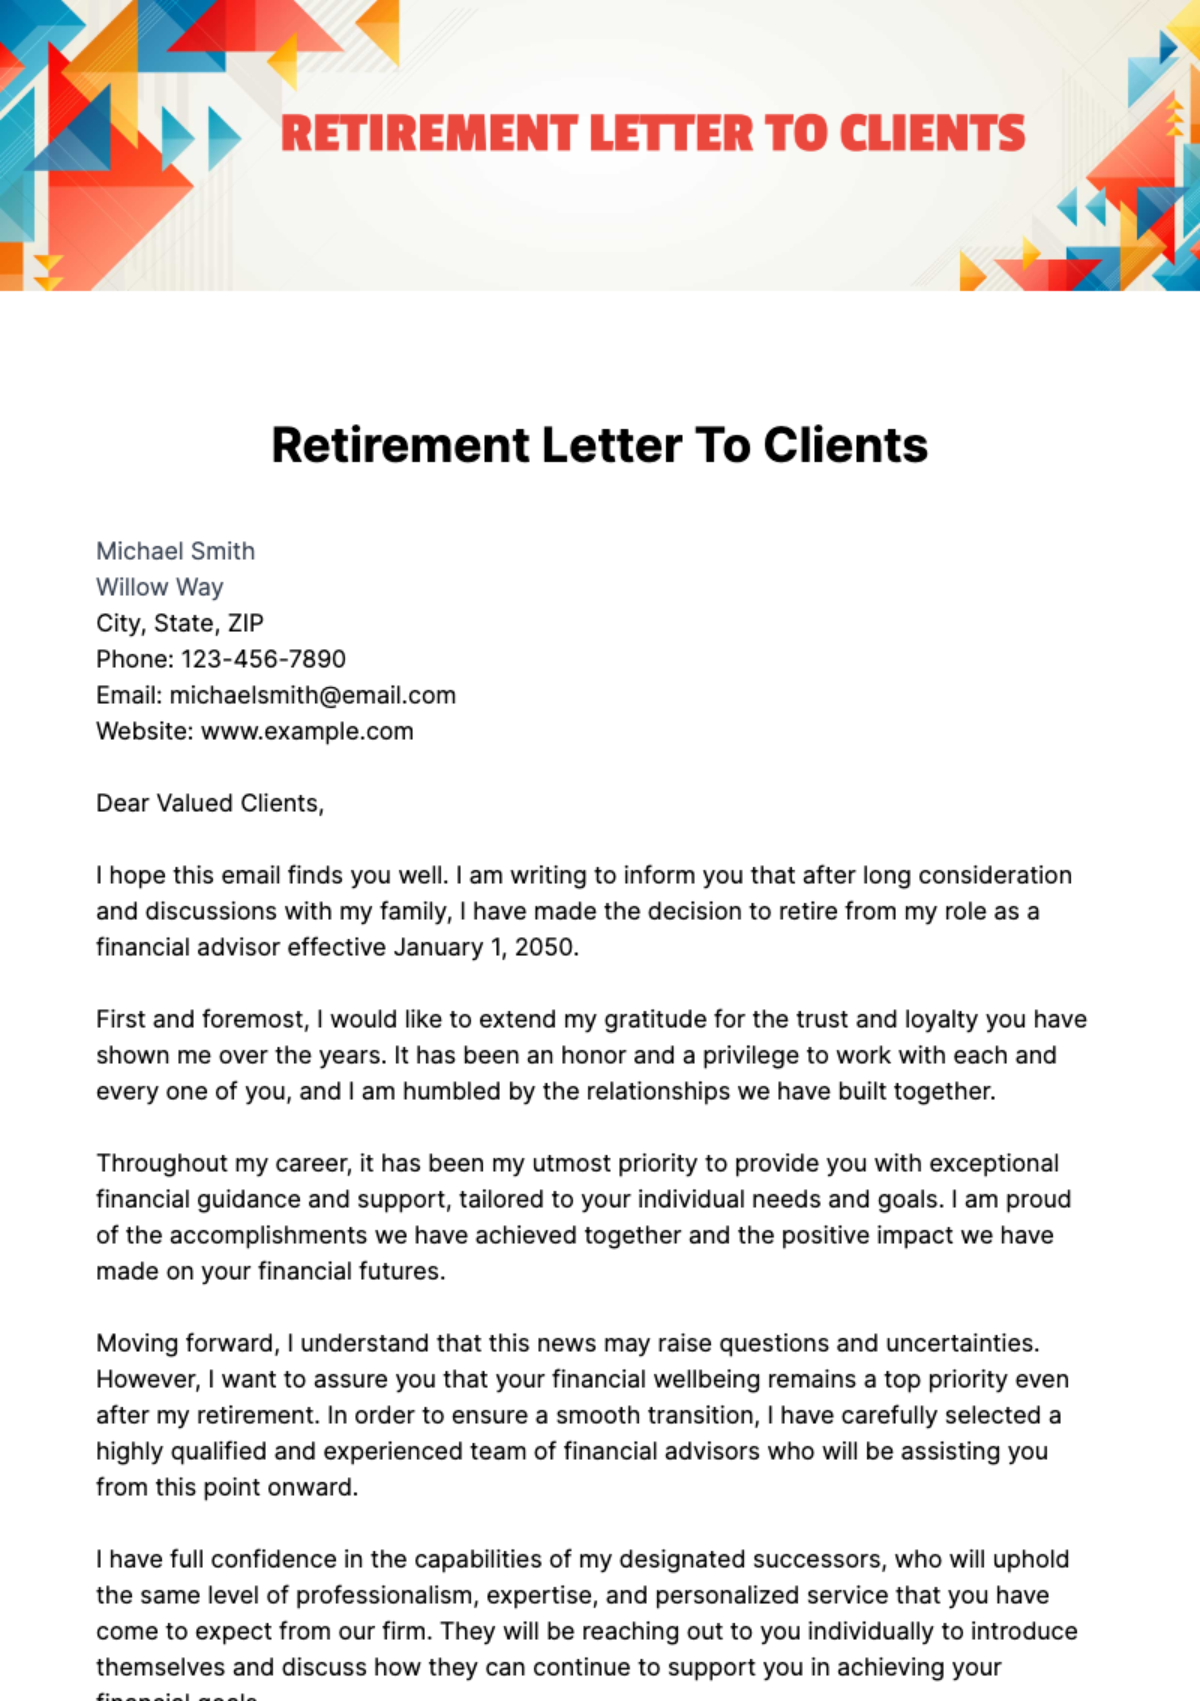 Free Retirement Letter To Clients Template